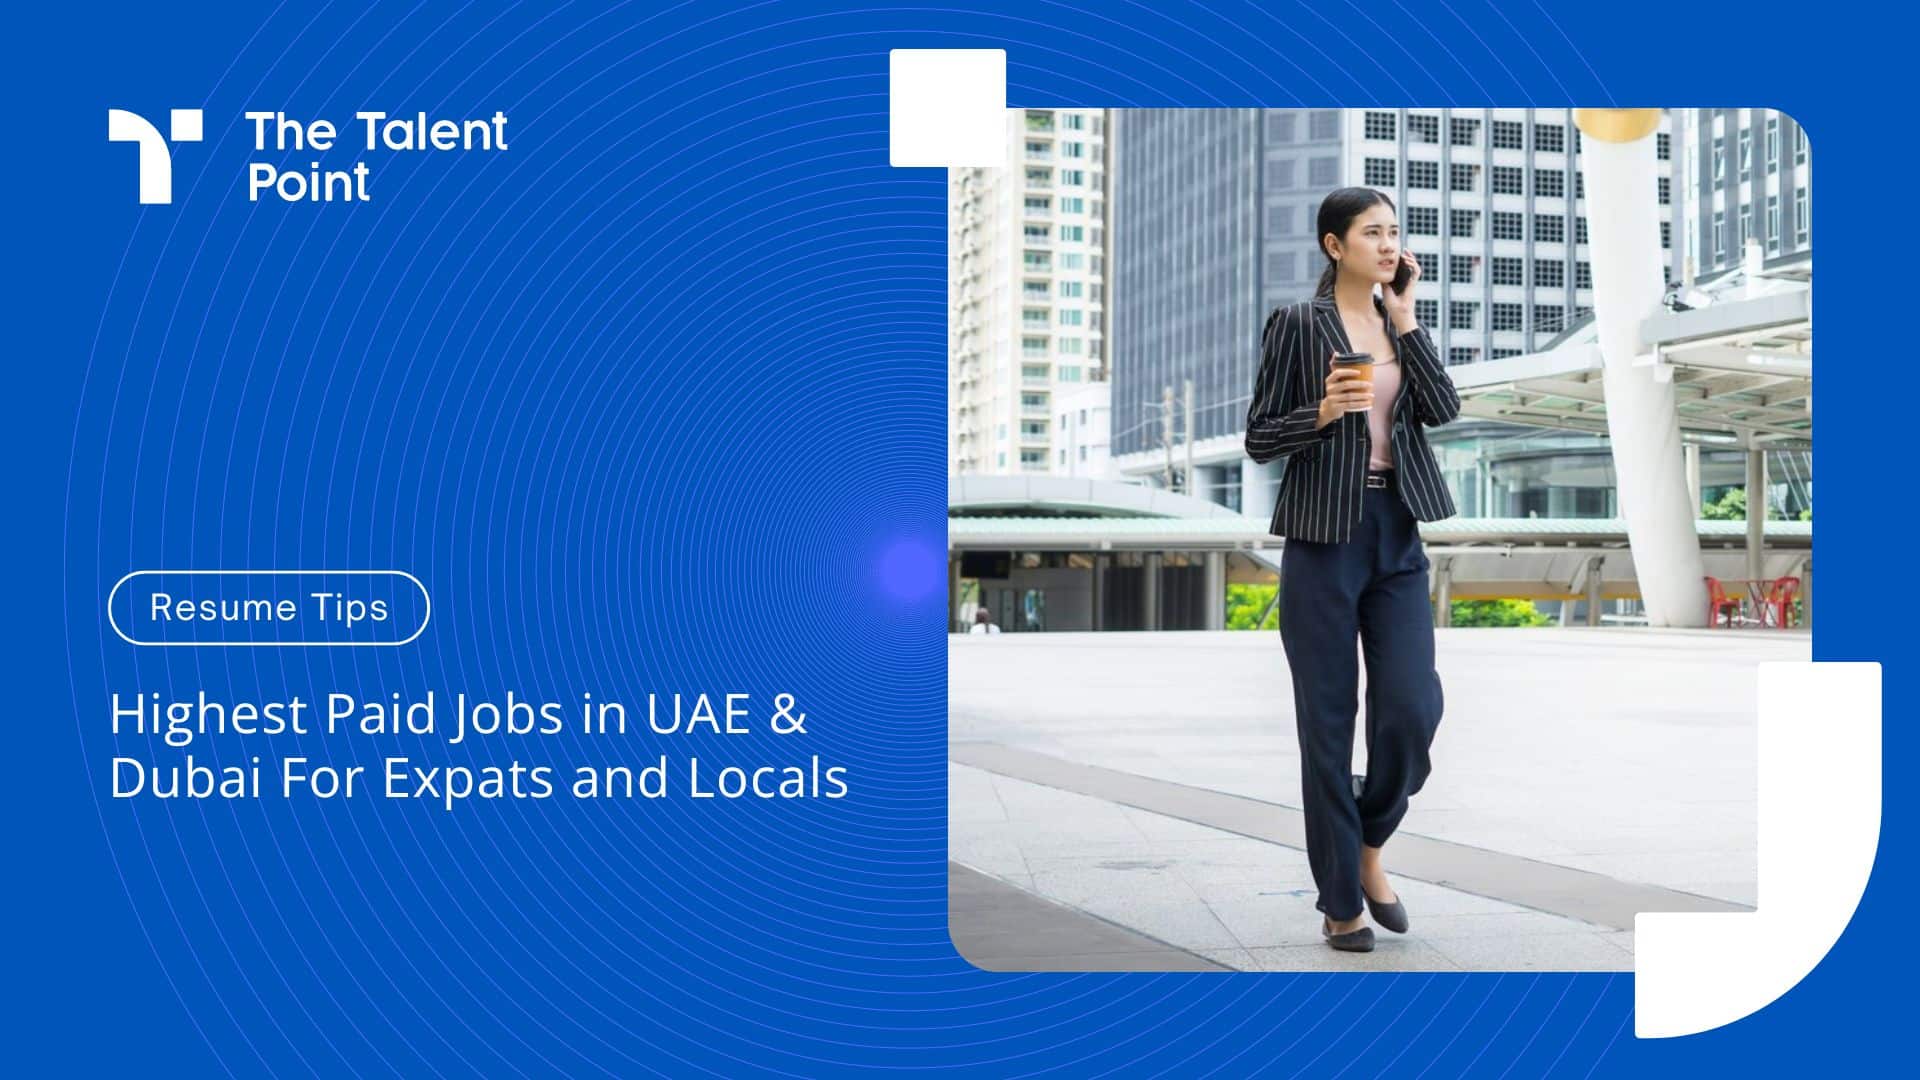 Top 15 Highest Paid Jobs in UAE & Dubai For Expats and Locals